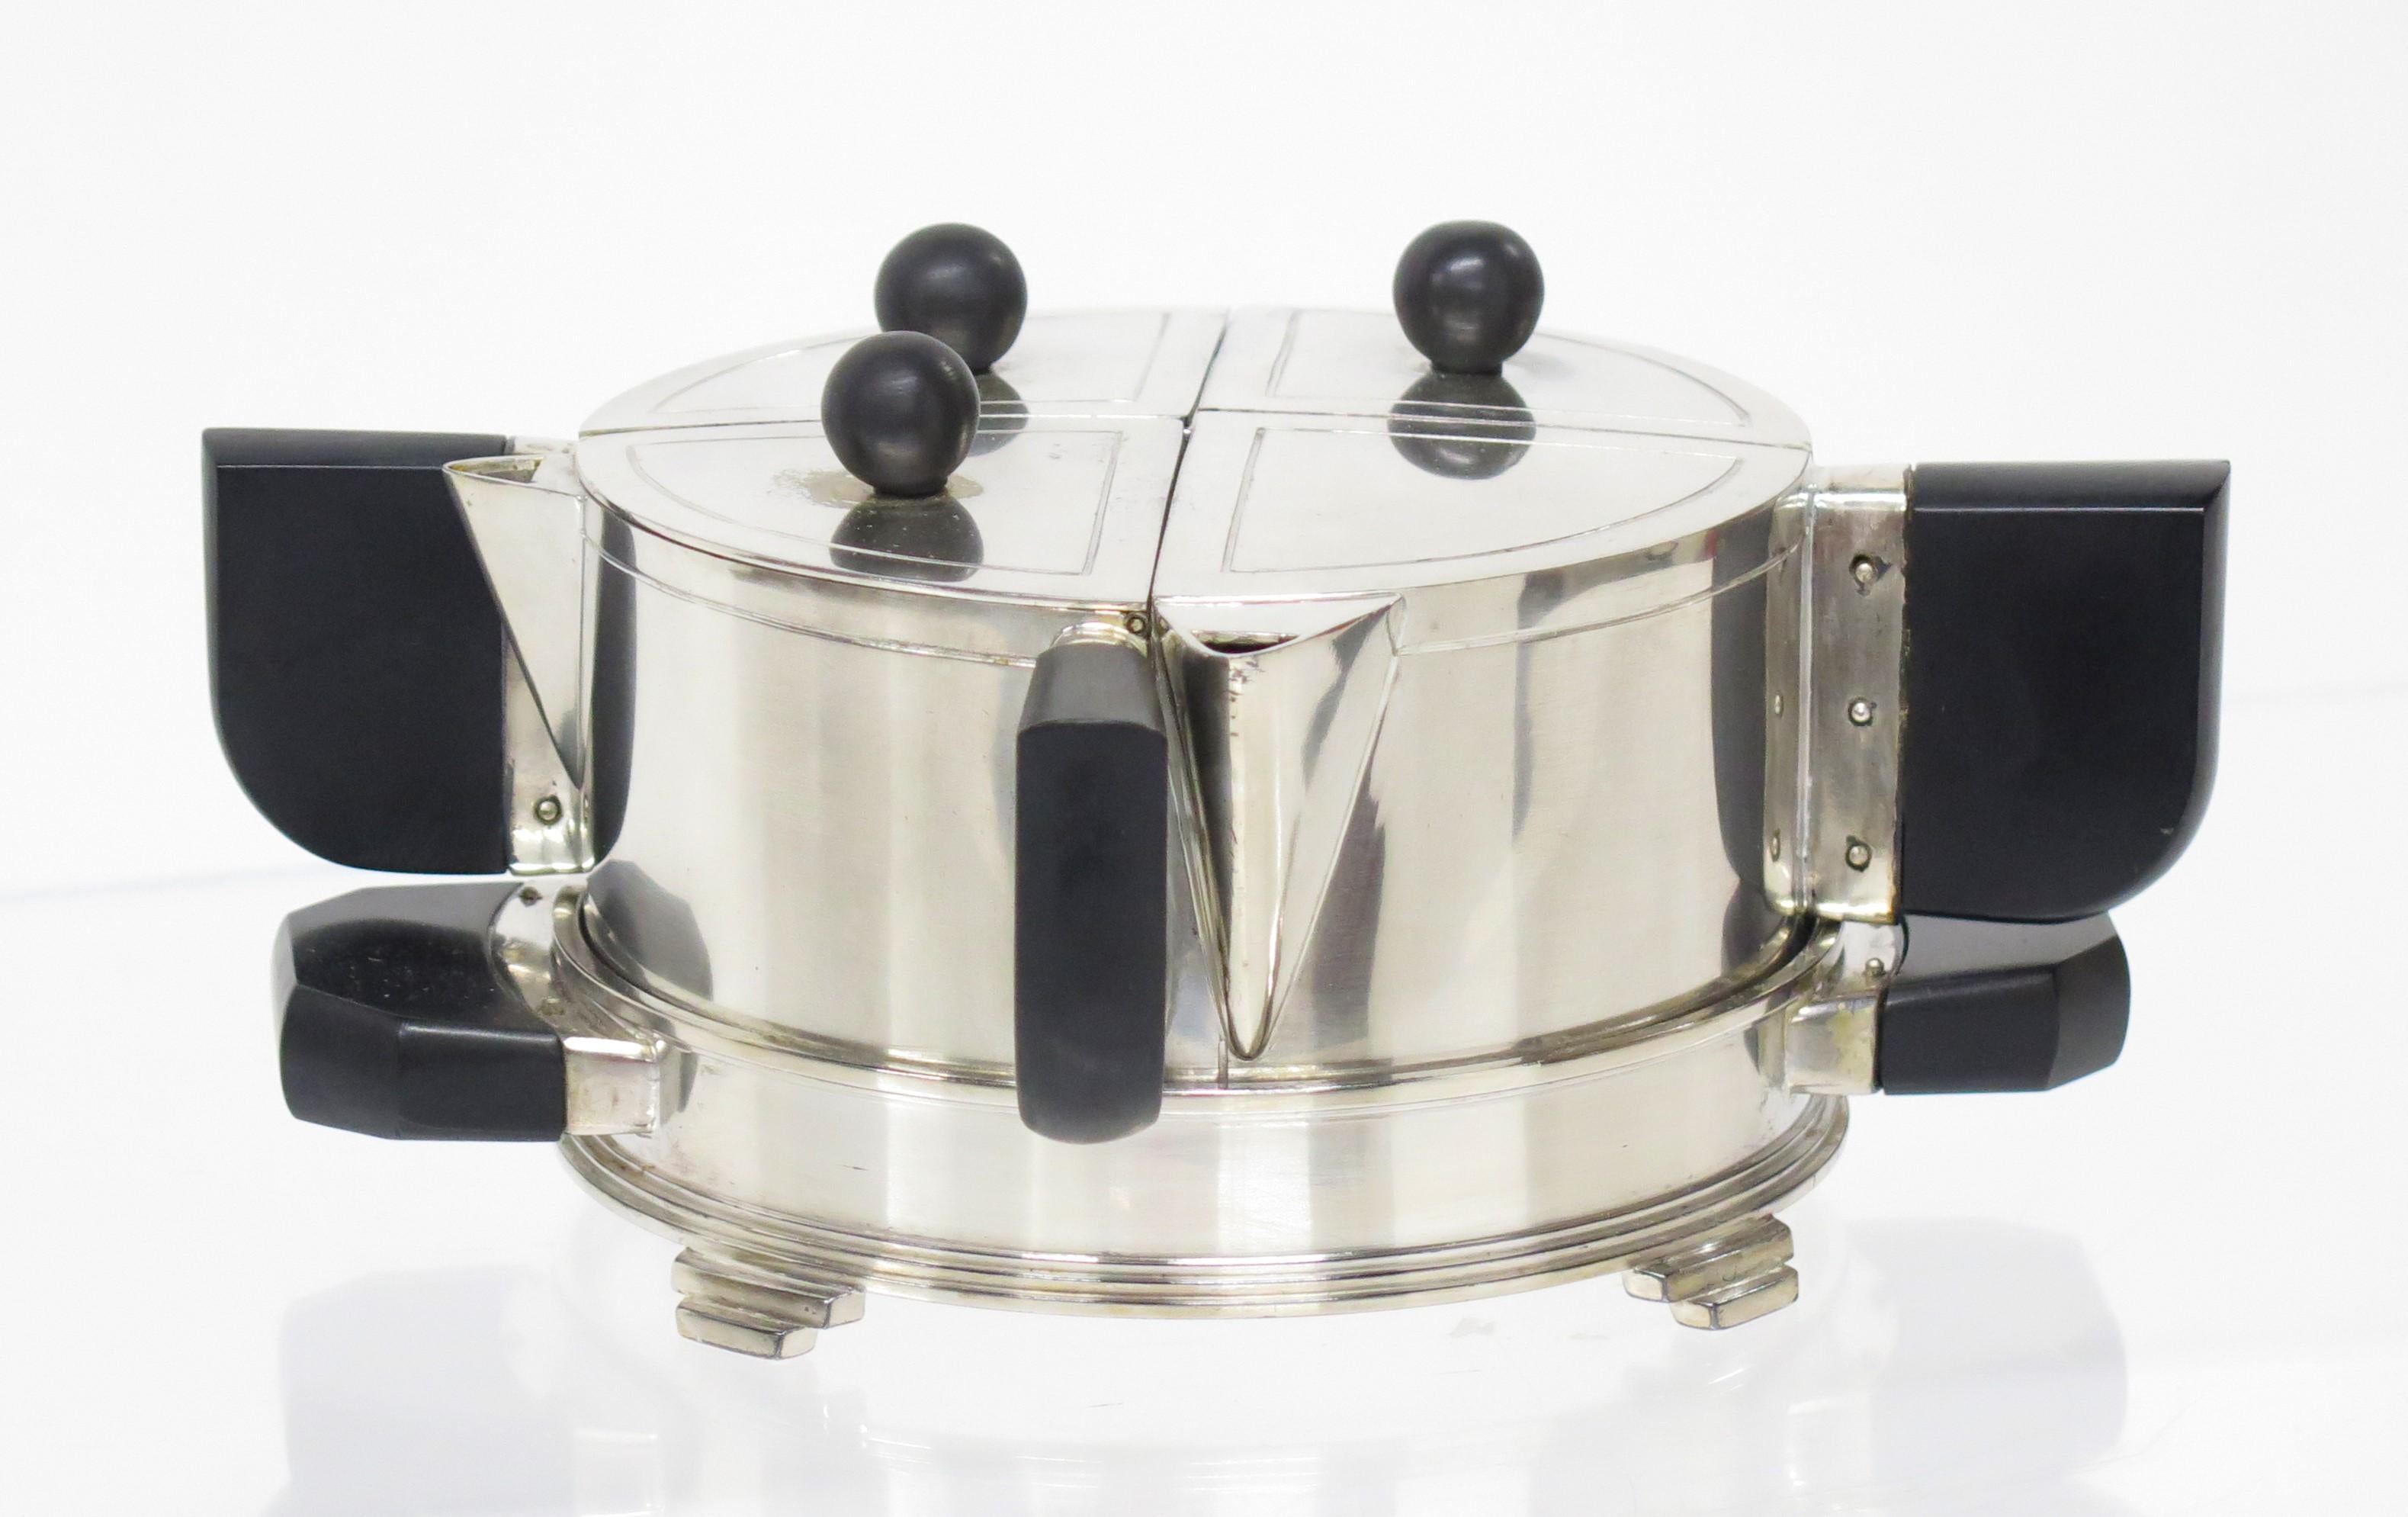 Hand-Crafted Art Deco Tea Set by Jean Theobald for Wilcox Silver Plate Company, 1928 For Sale